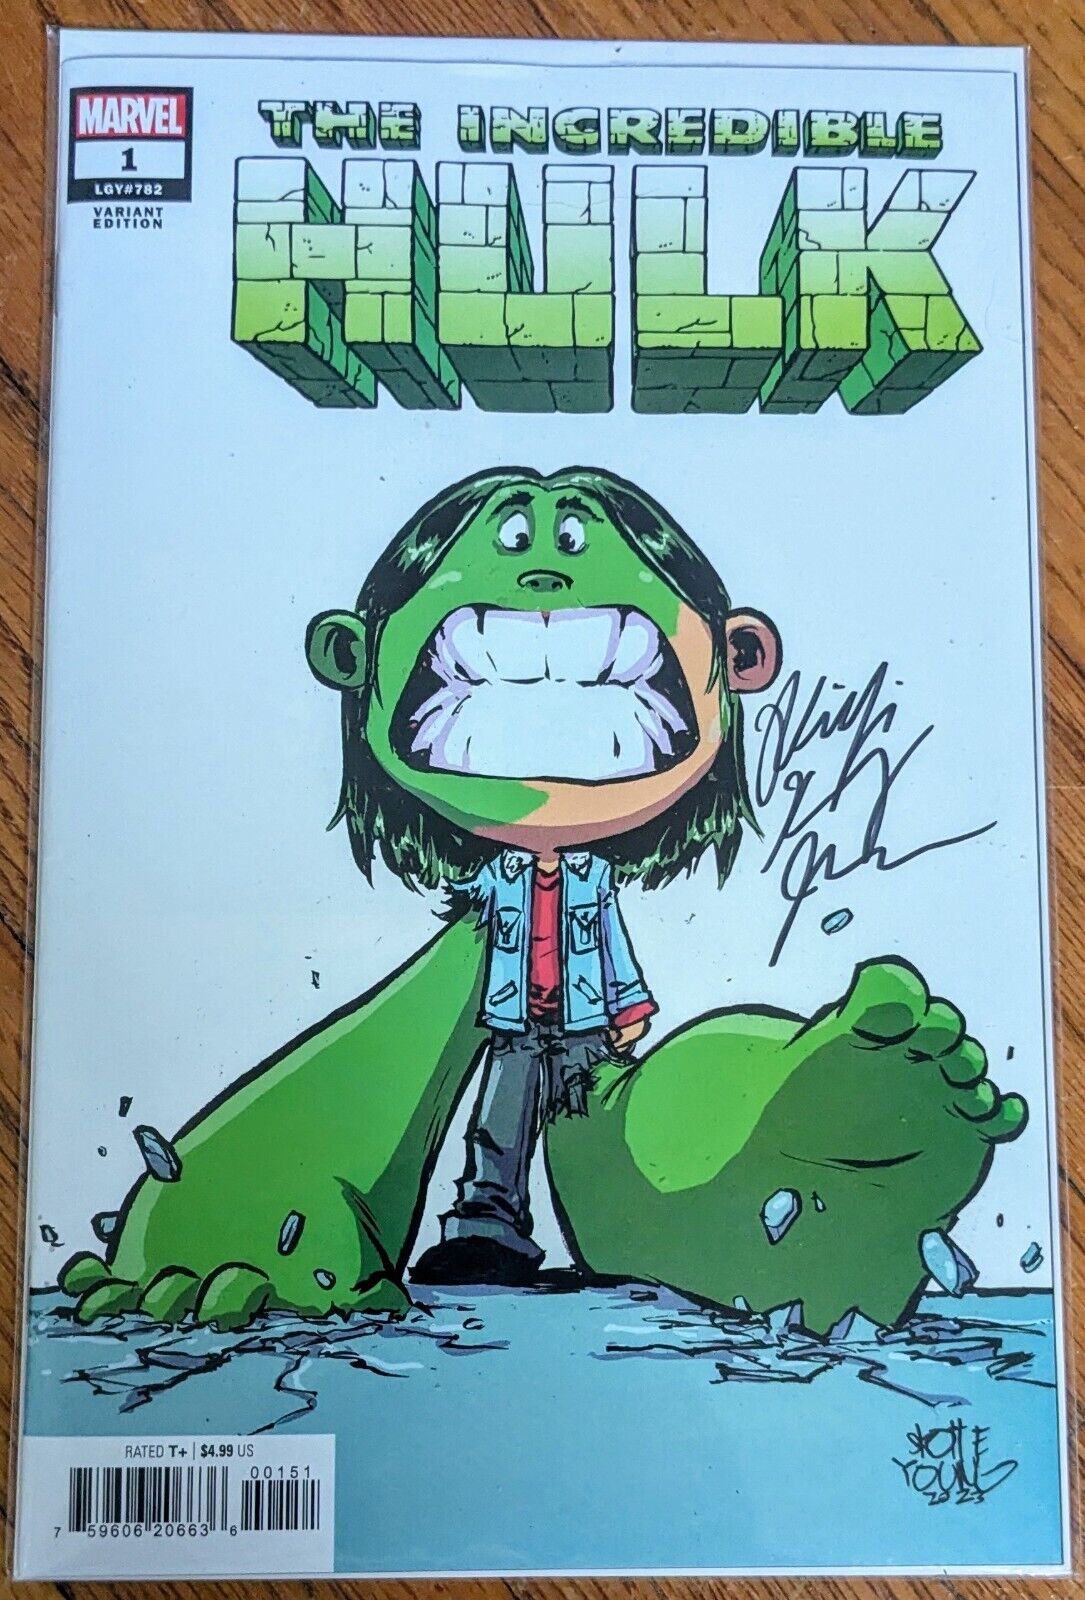 Incredible Hulk #1 (Skottie Young Variant) (Signed by Phillip Kennedy Johnson)